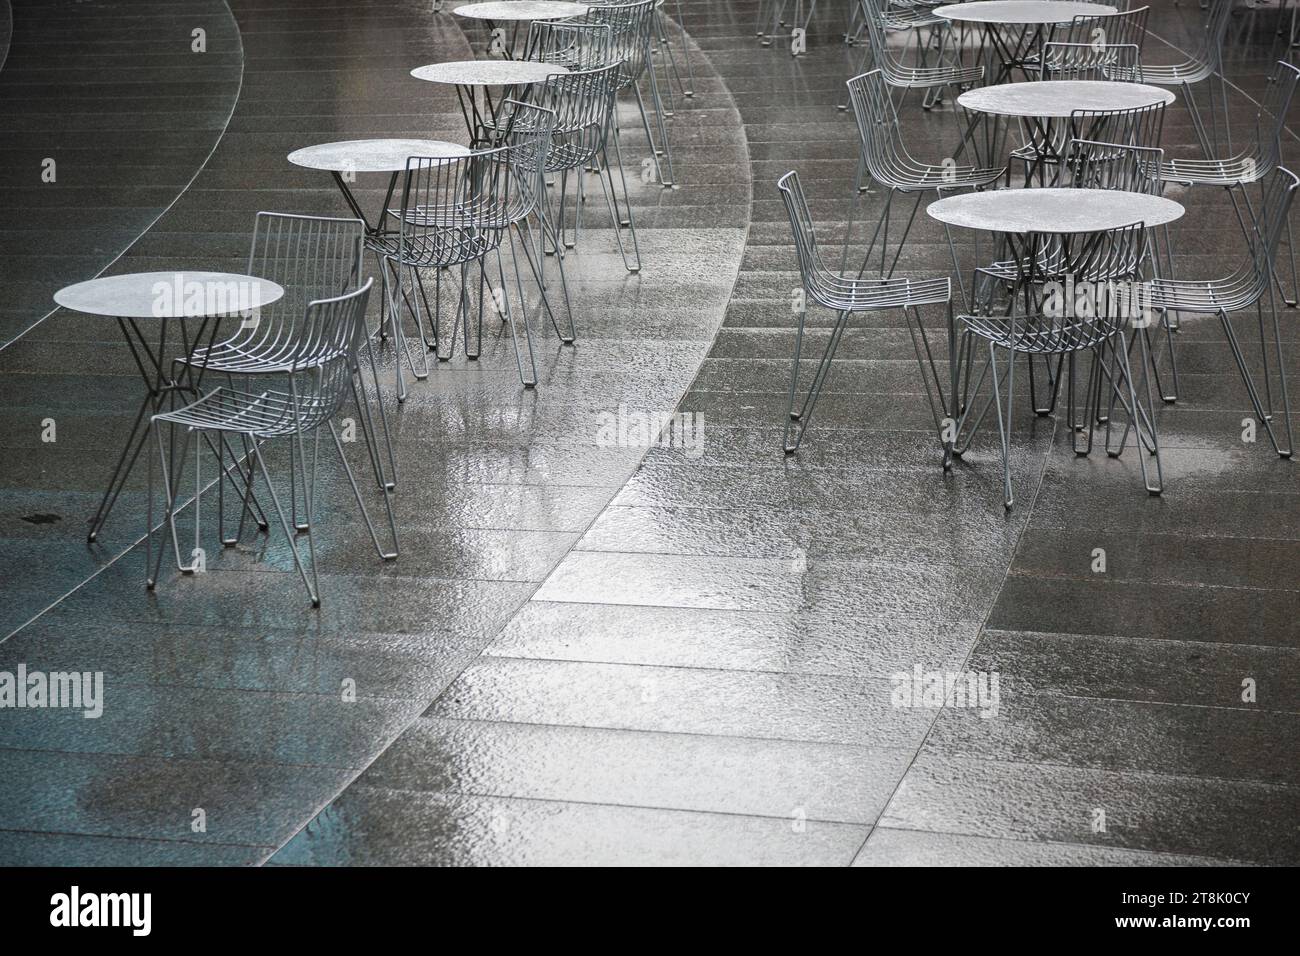 Outdoor café tables and chairs on rainy day Stock Photo